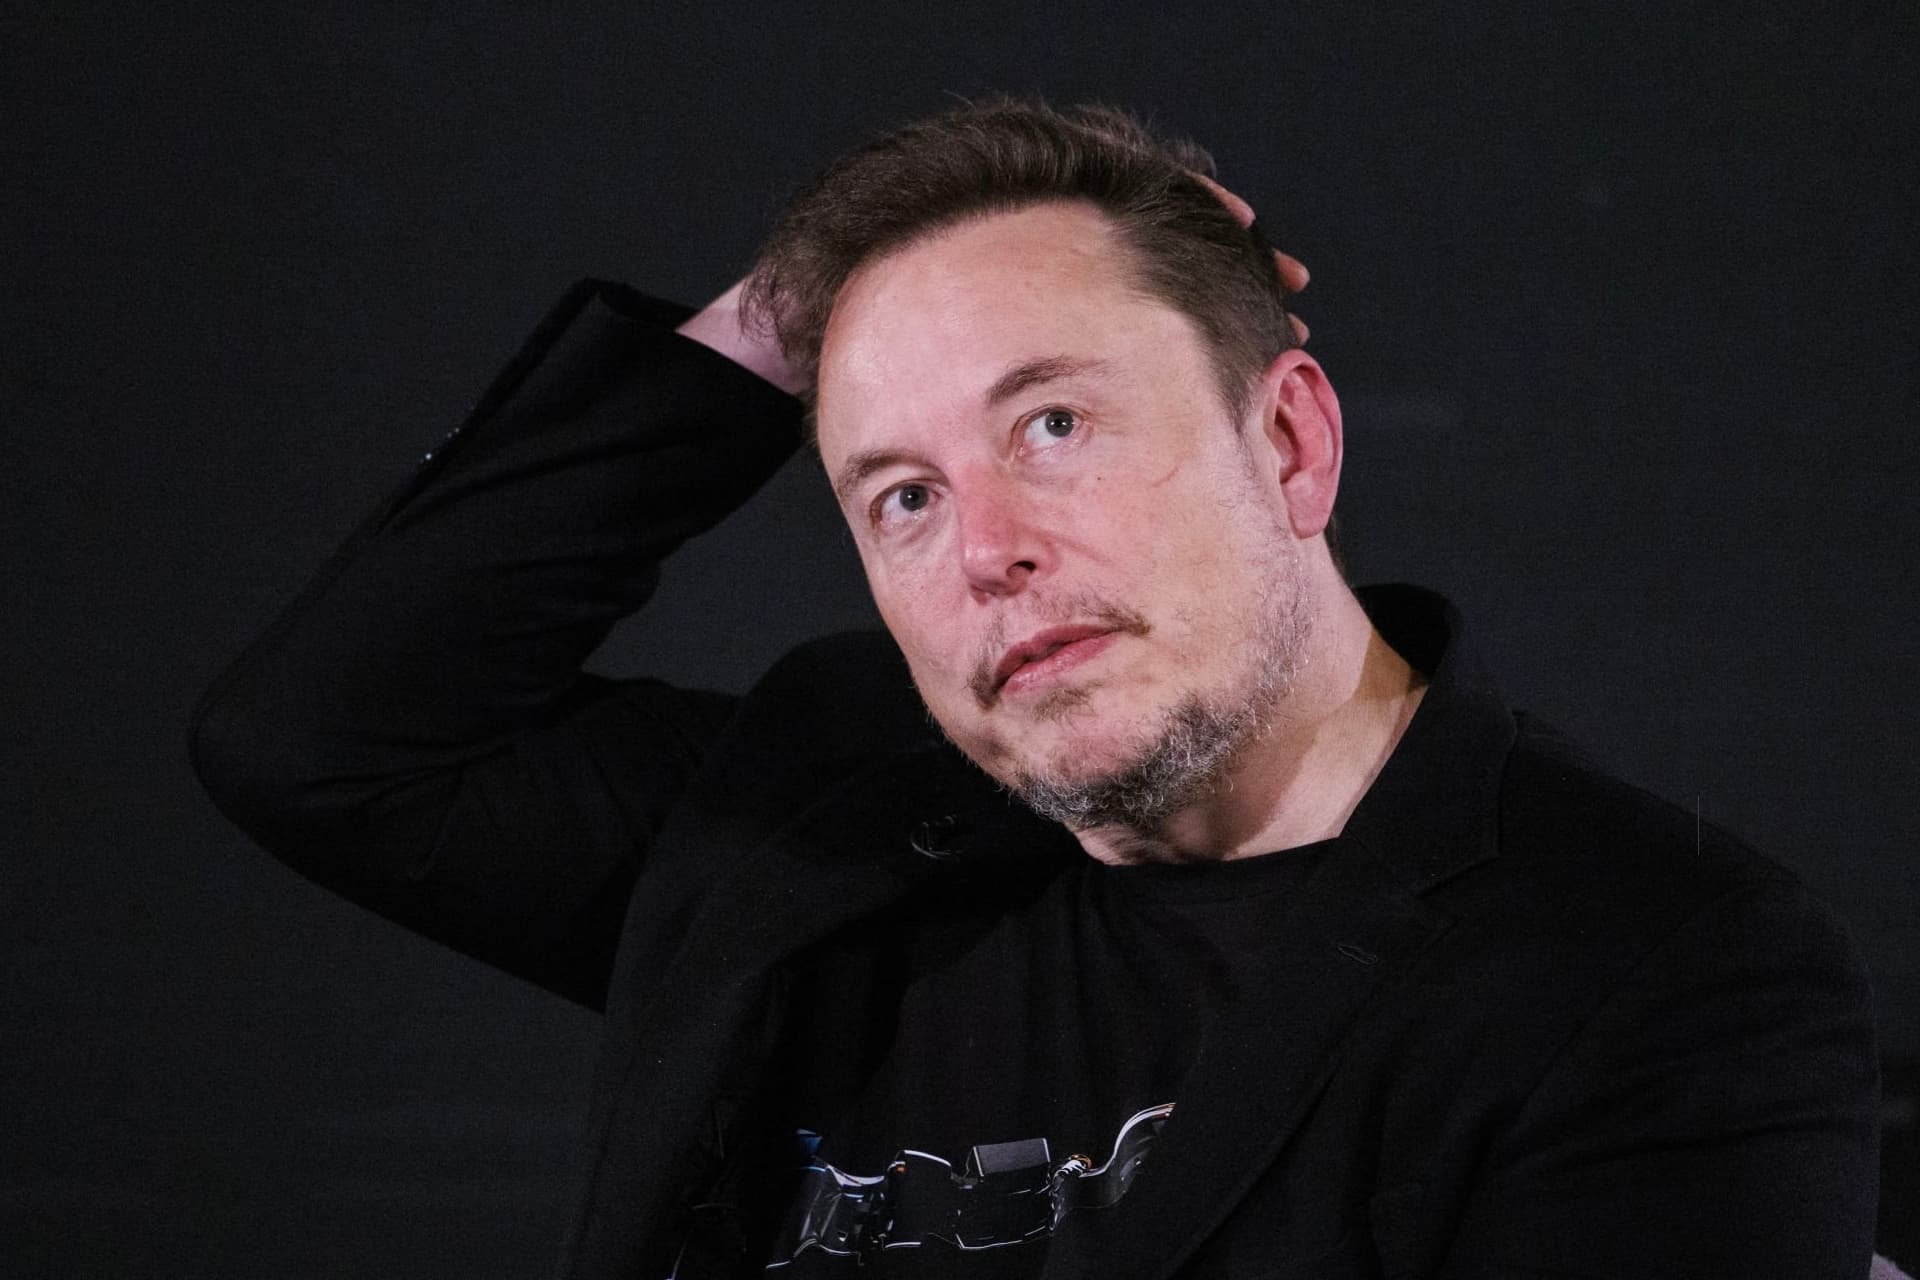 elon musk confused face black shirt 6544a177ac3634182f4898d6